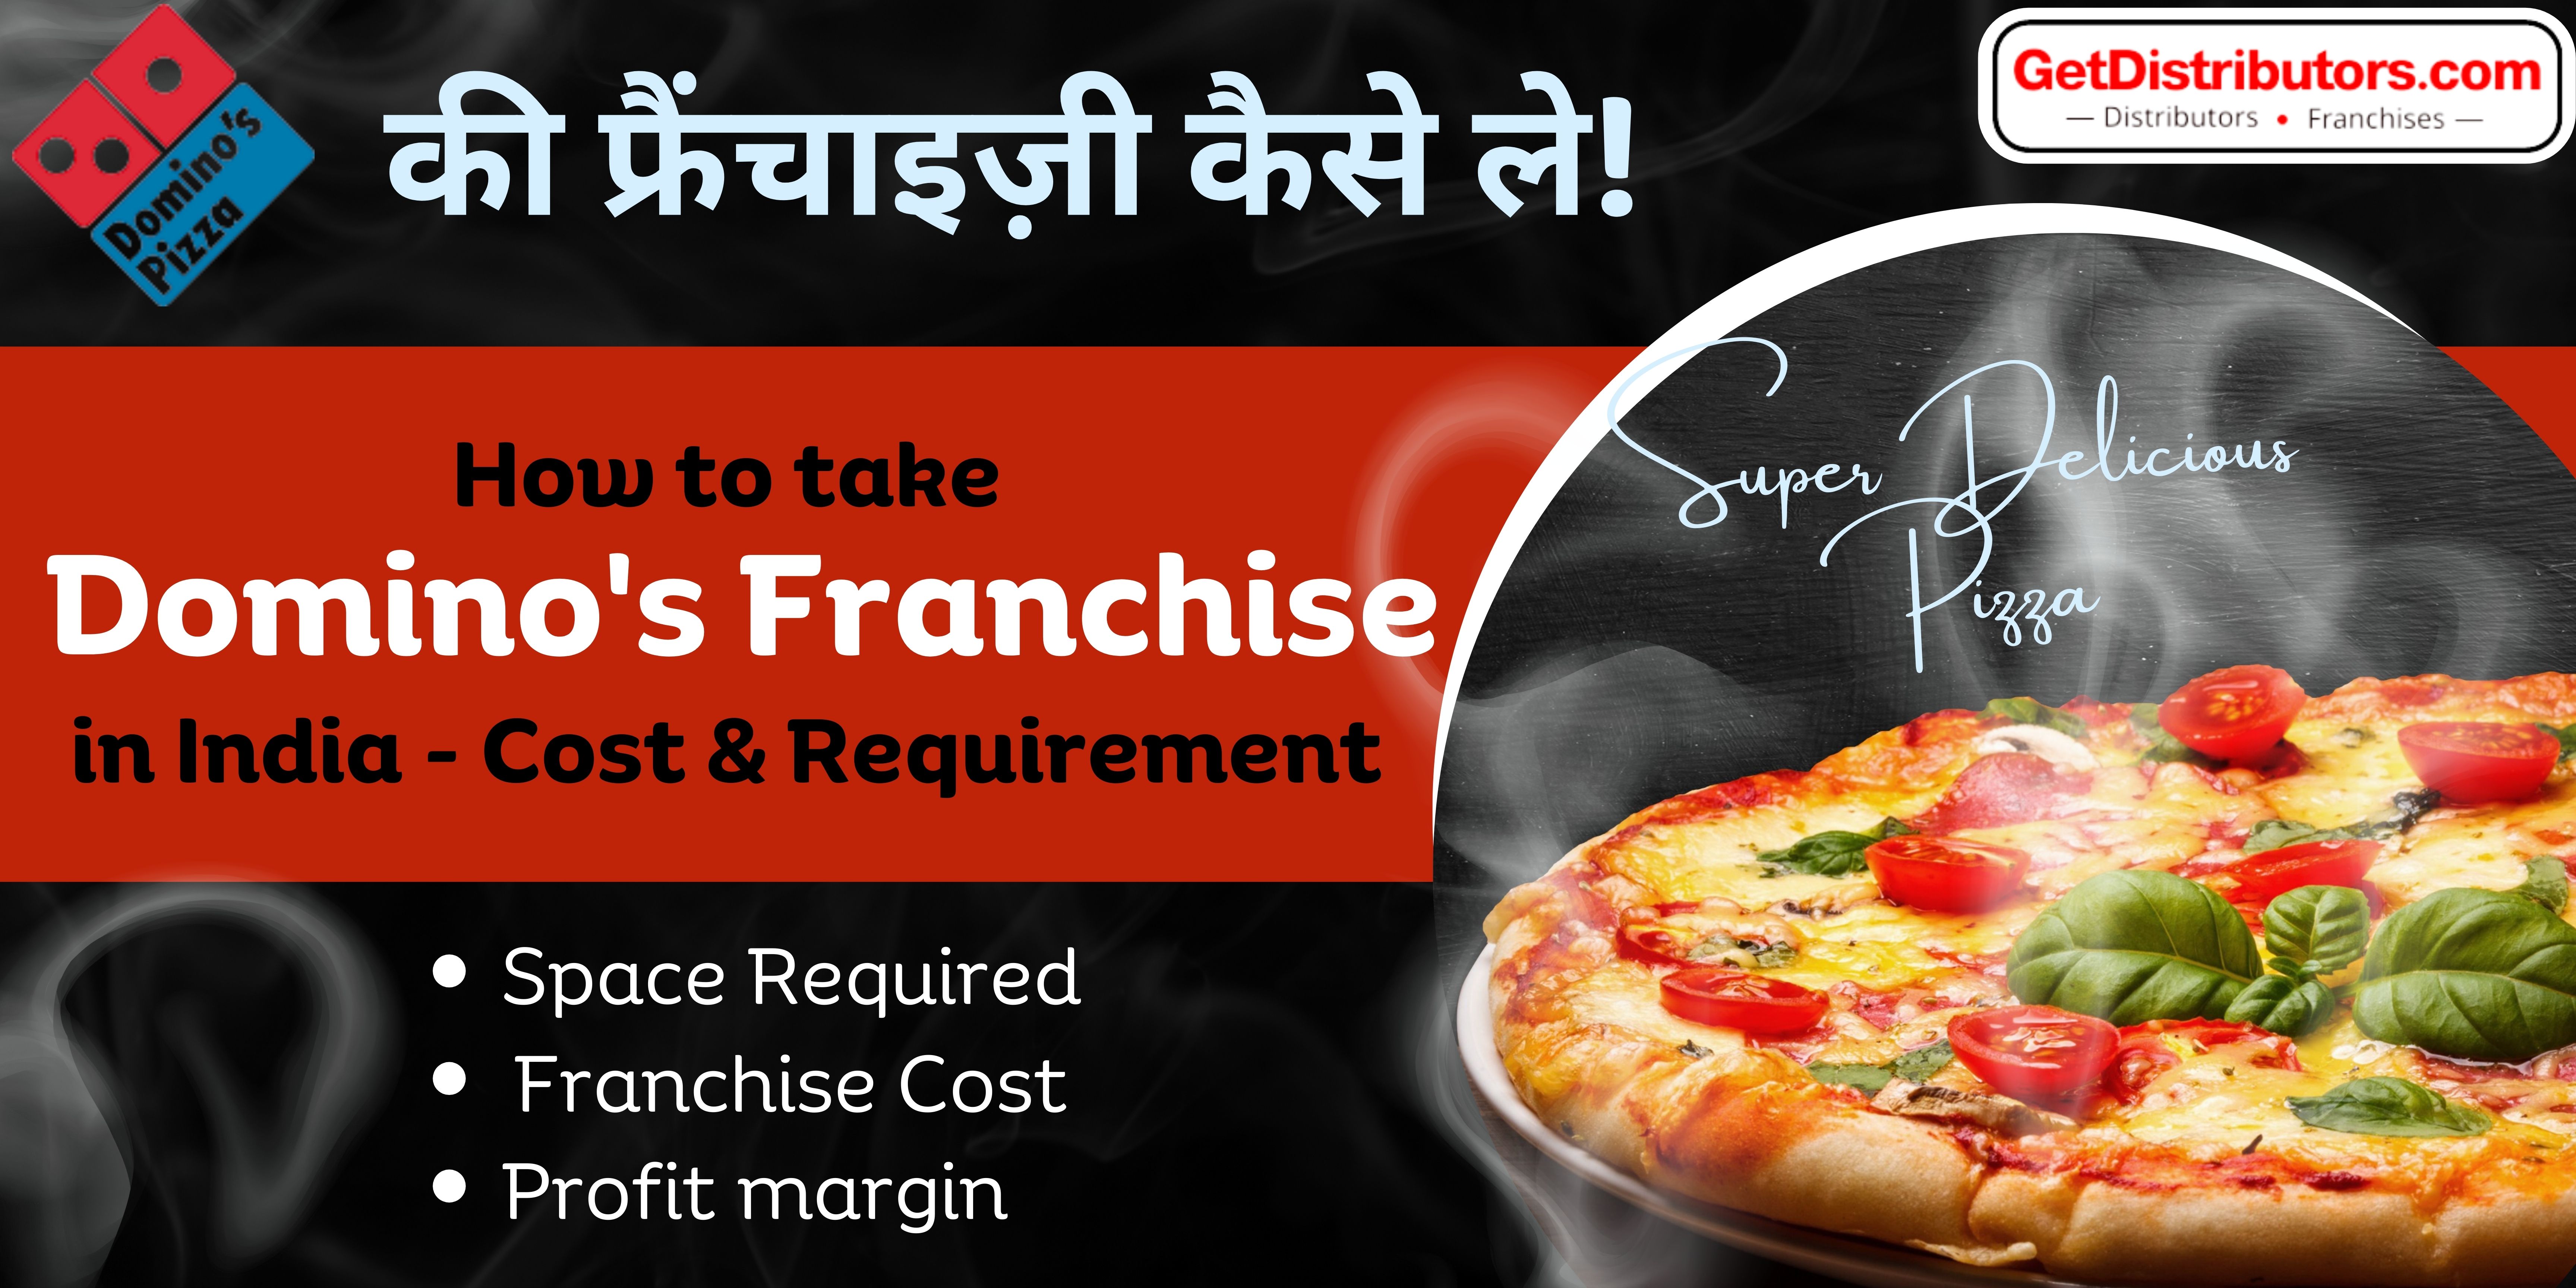 How to take Domino’s Franchise in India: Cost & Requirements